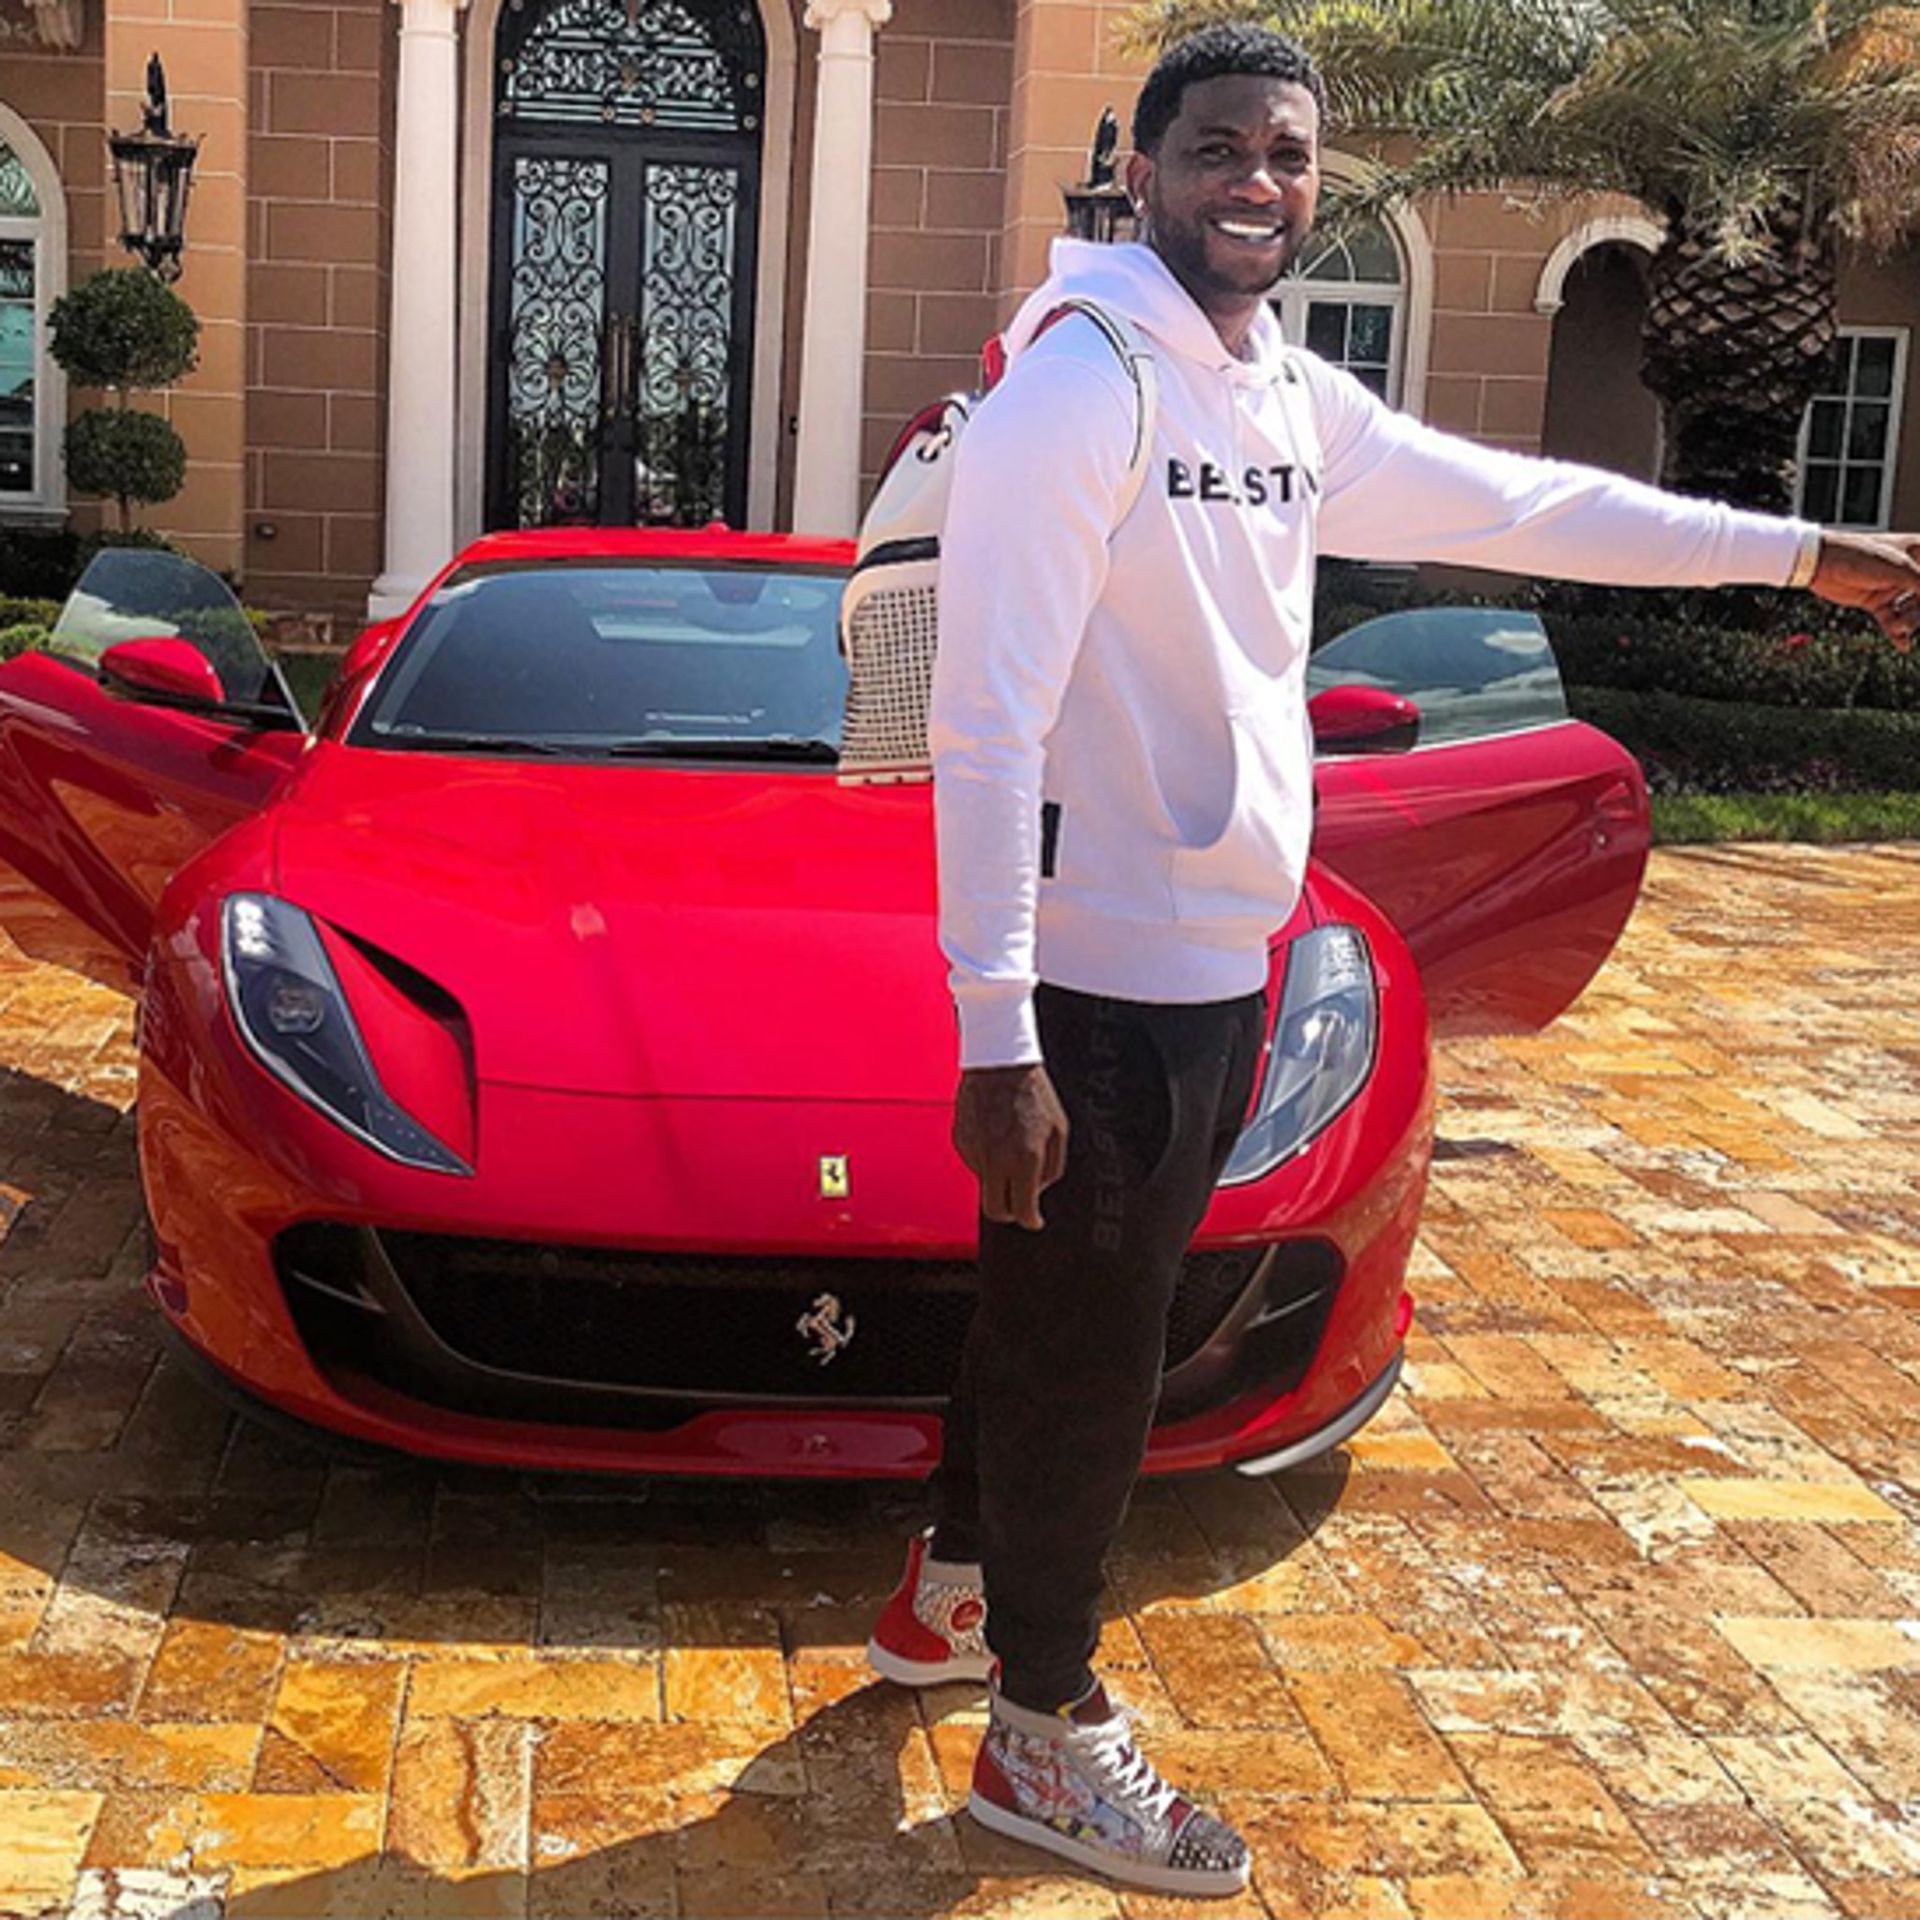 Gucci Mane Biography: Age, Height, Net Worth, Cars, House, Parents, Siblings, Wife, Children, Yours Truly, Artists, April 2, 2023